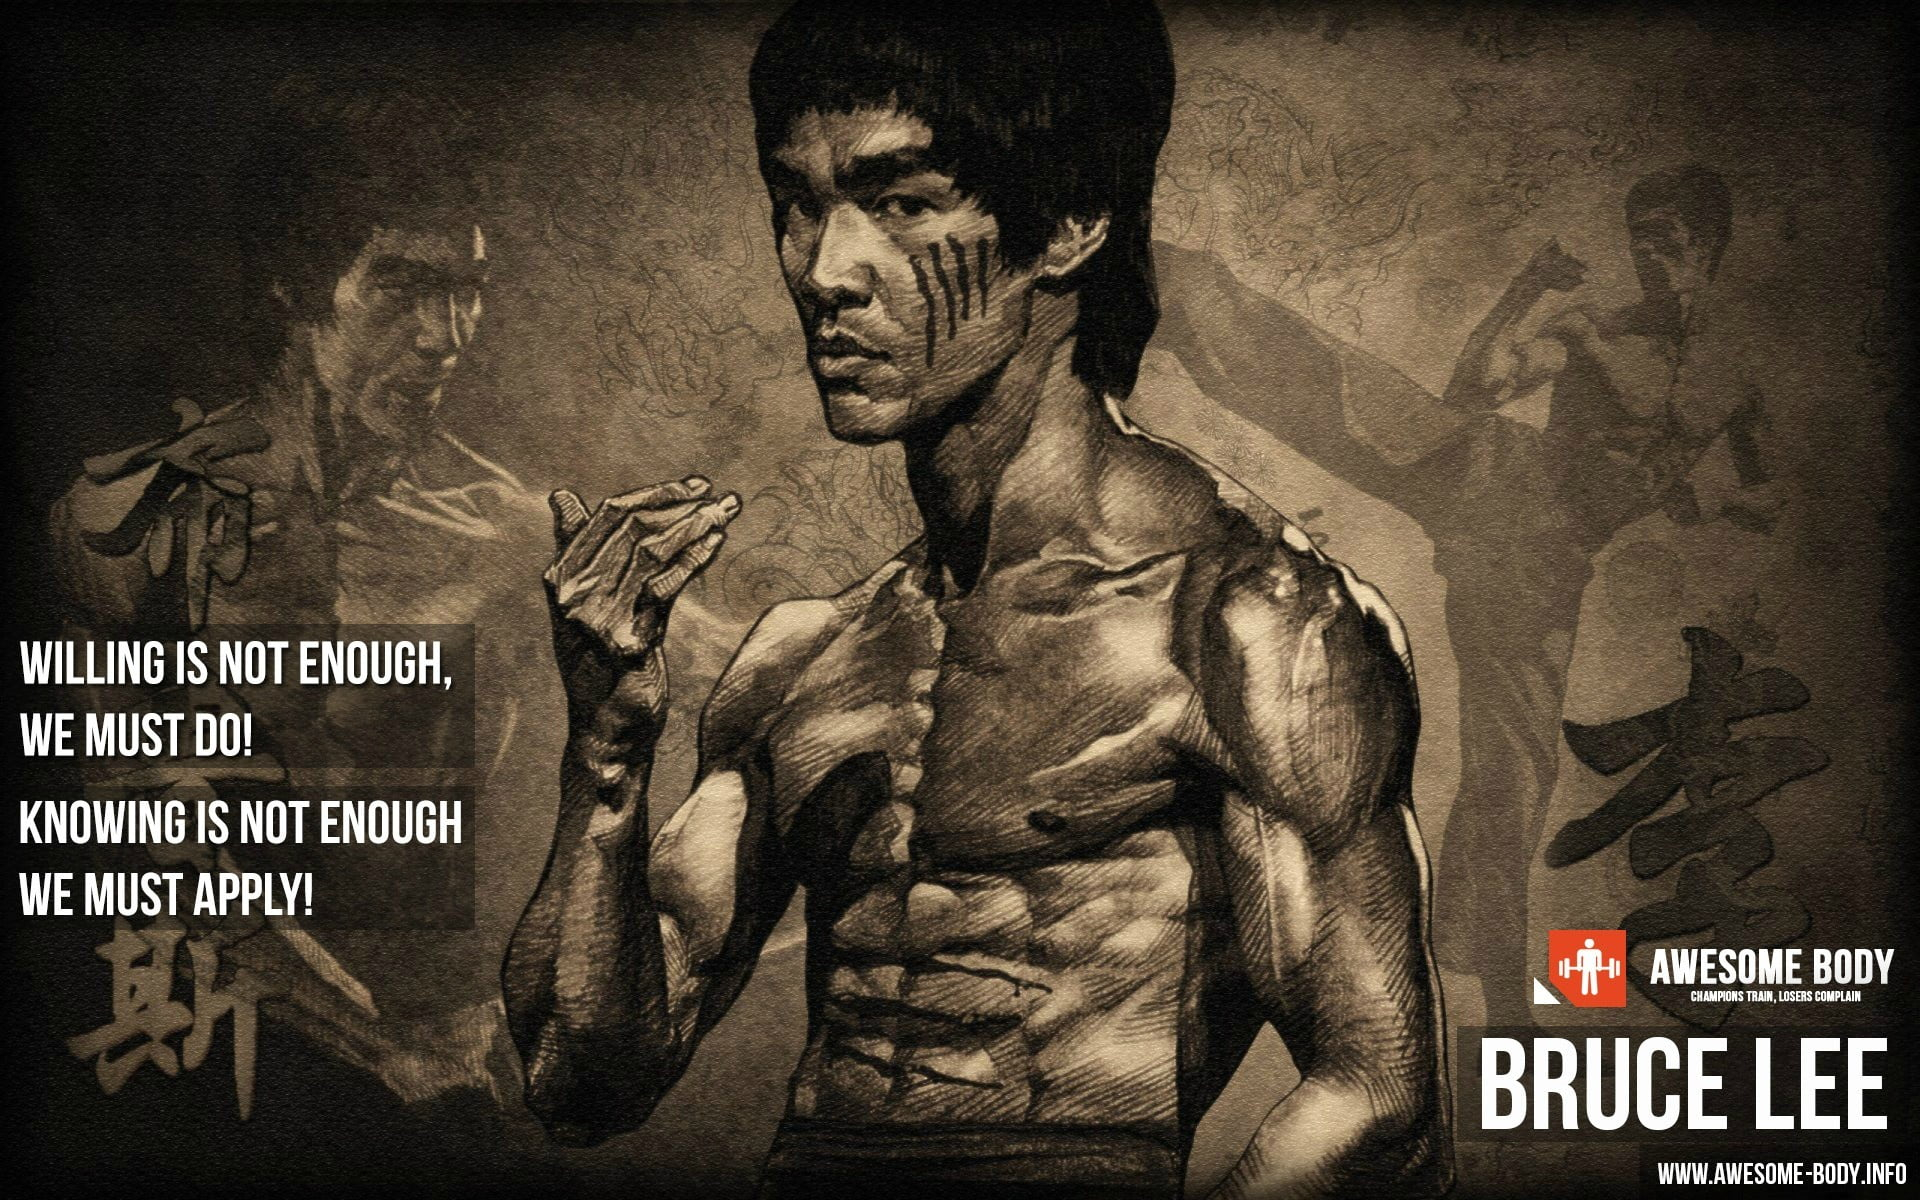 Bruce Lee wallpaper, working out, skinny, quote, motivational